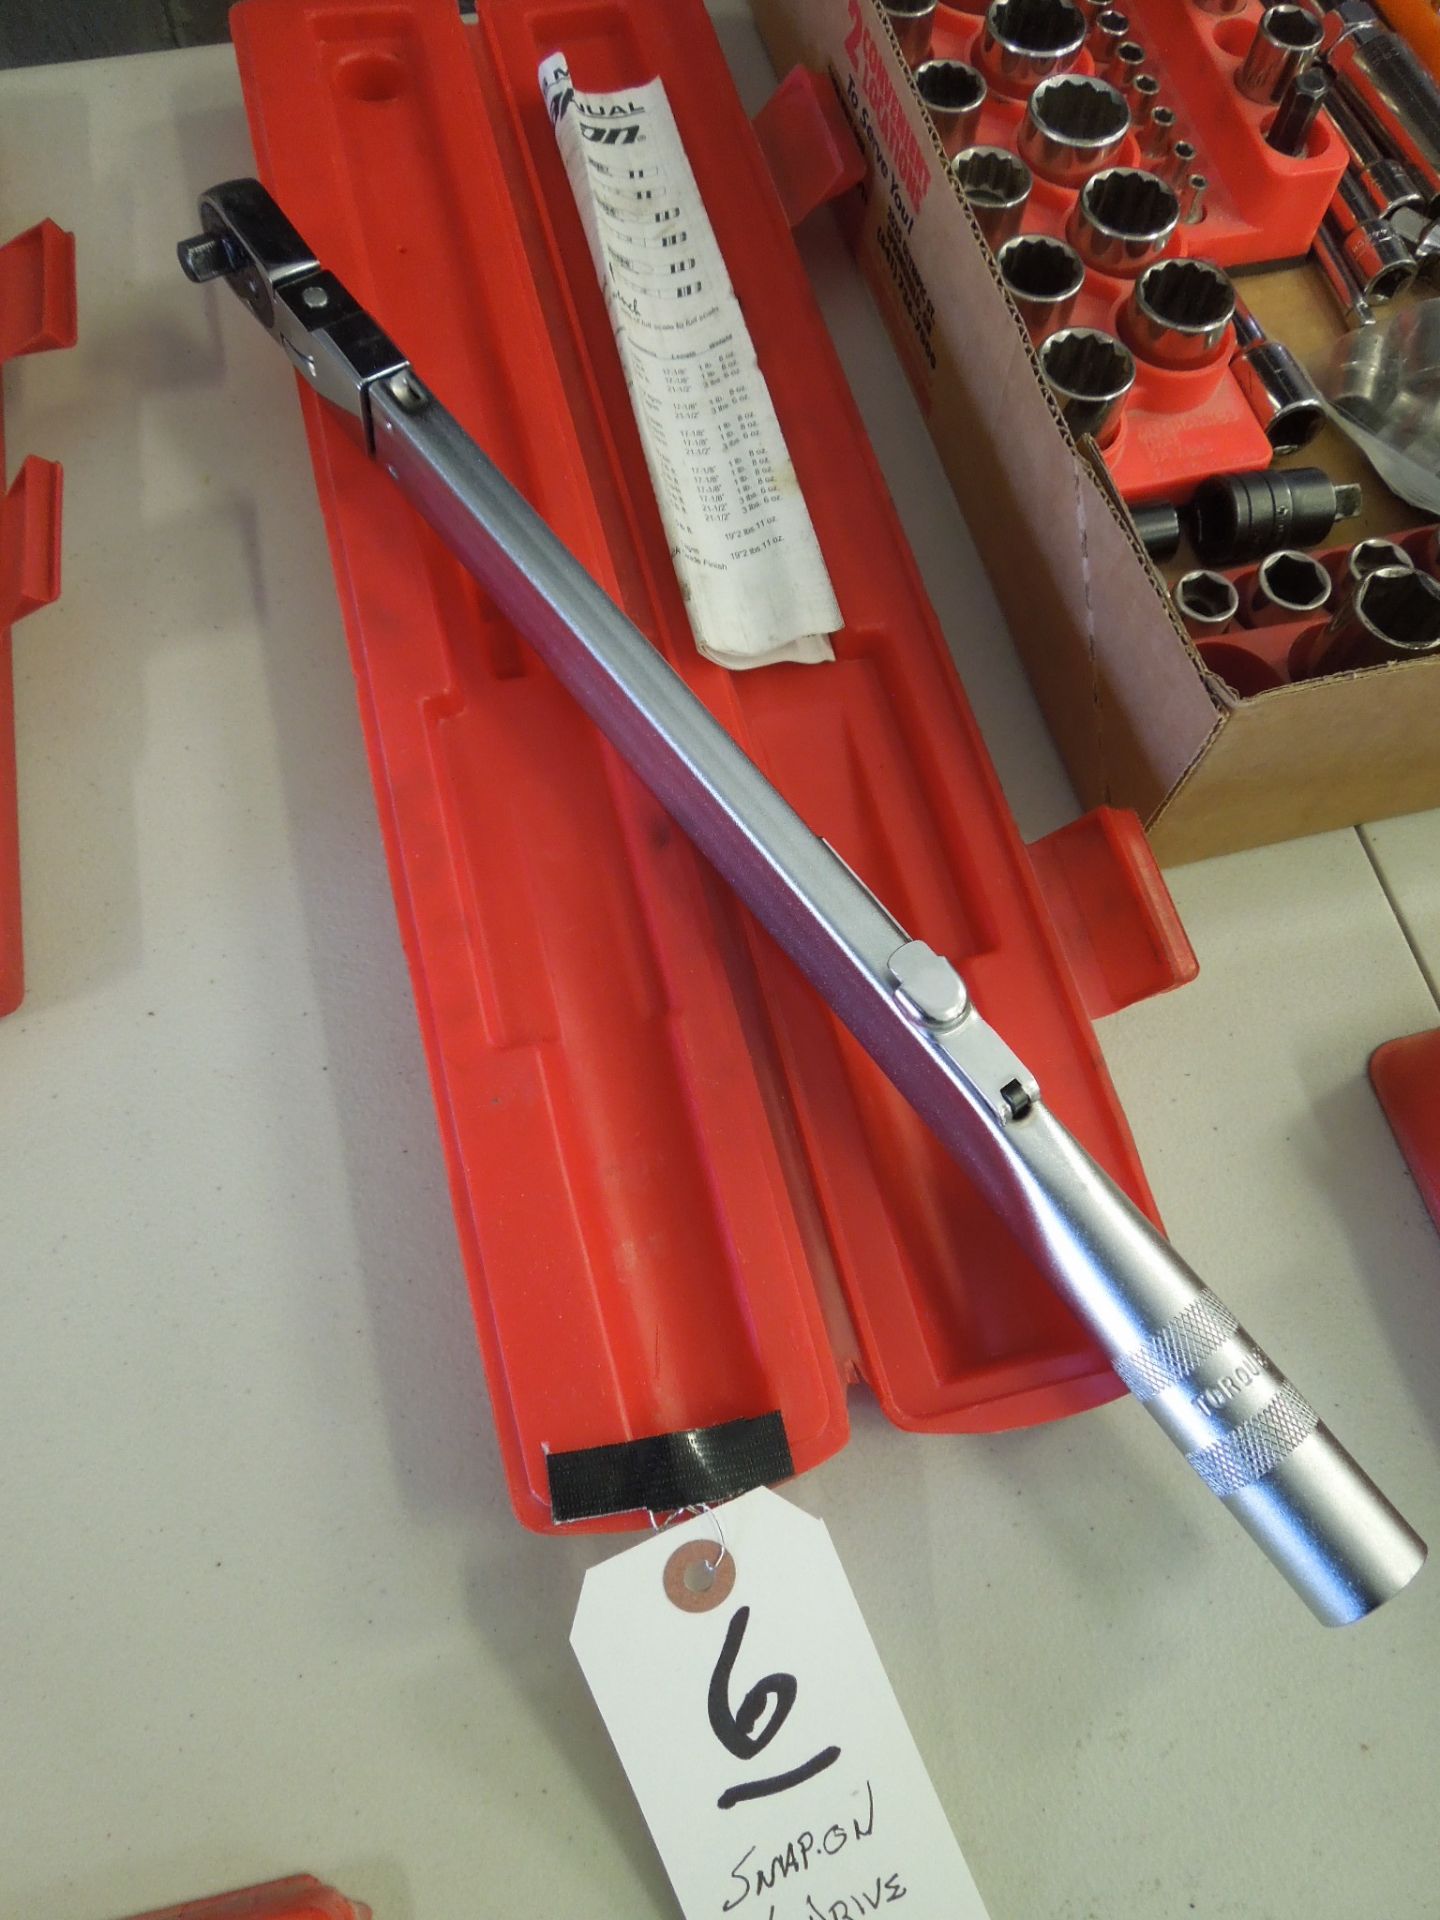 Snap-on 3/8 Drive Torque Wrench